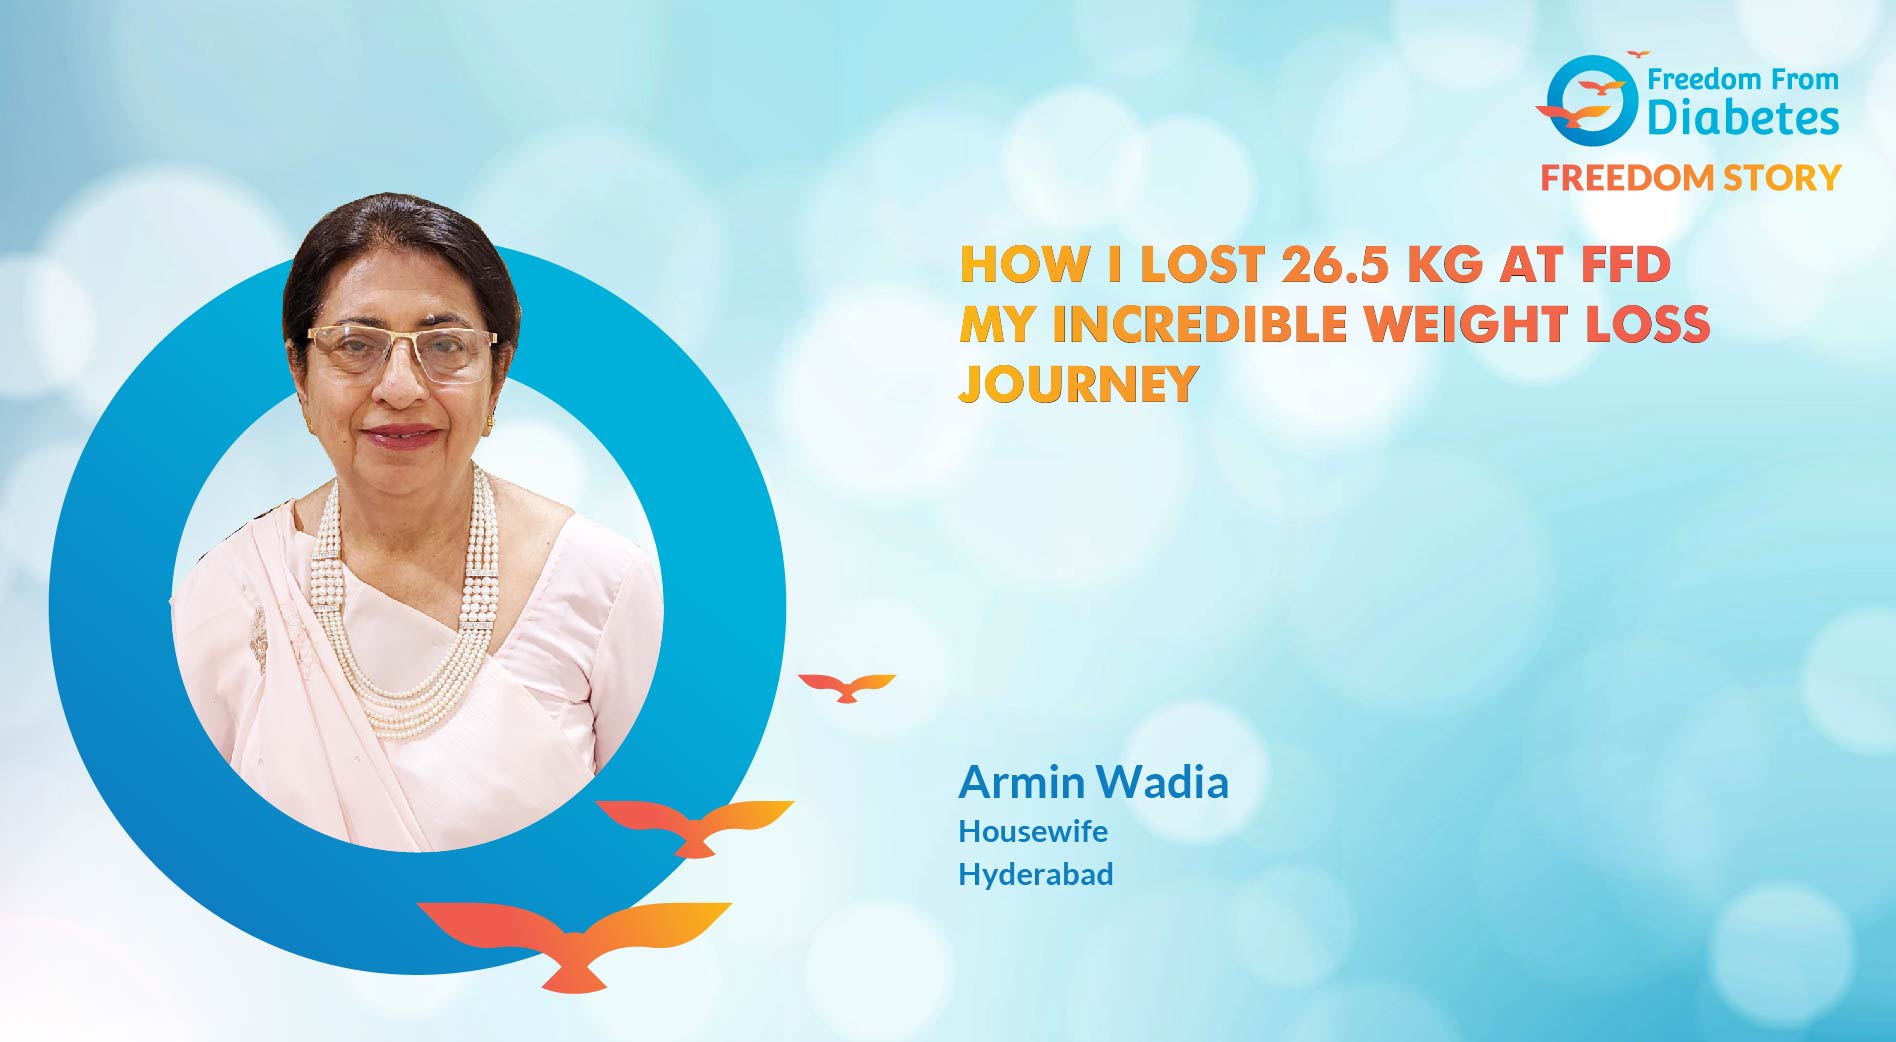 Armin Wadia: How I lost 26.5 kg at FFD